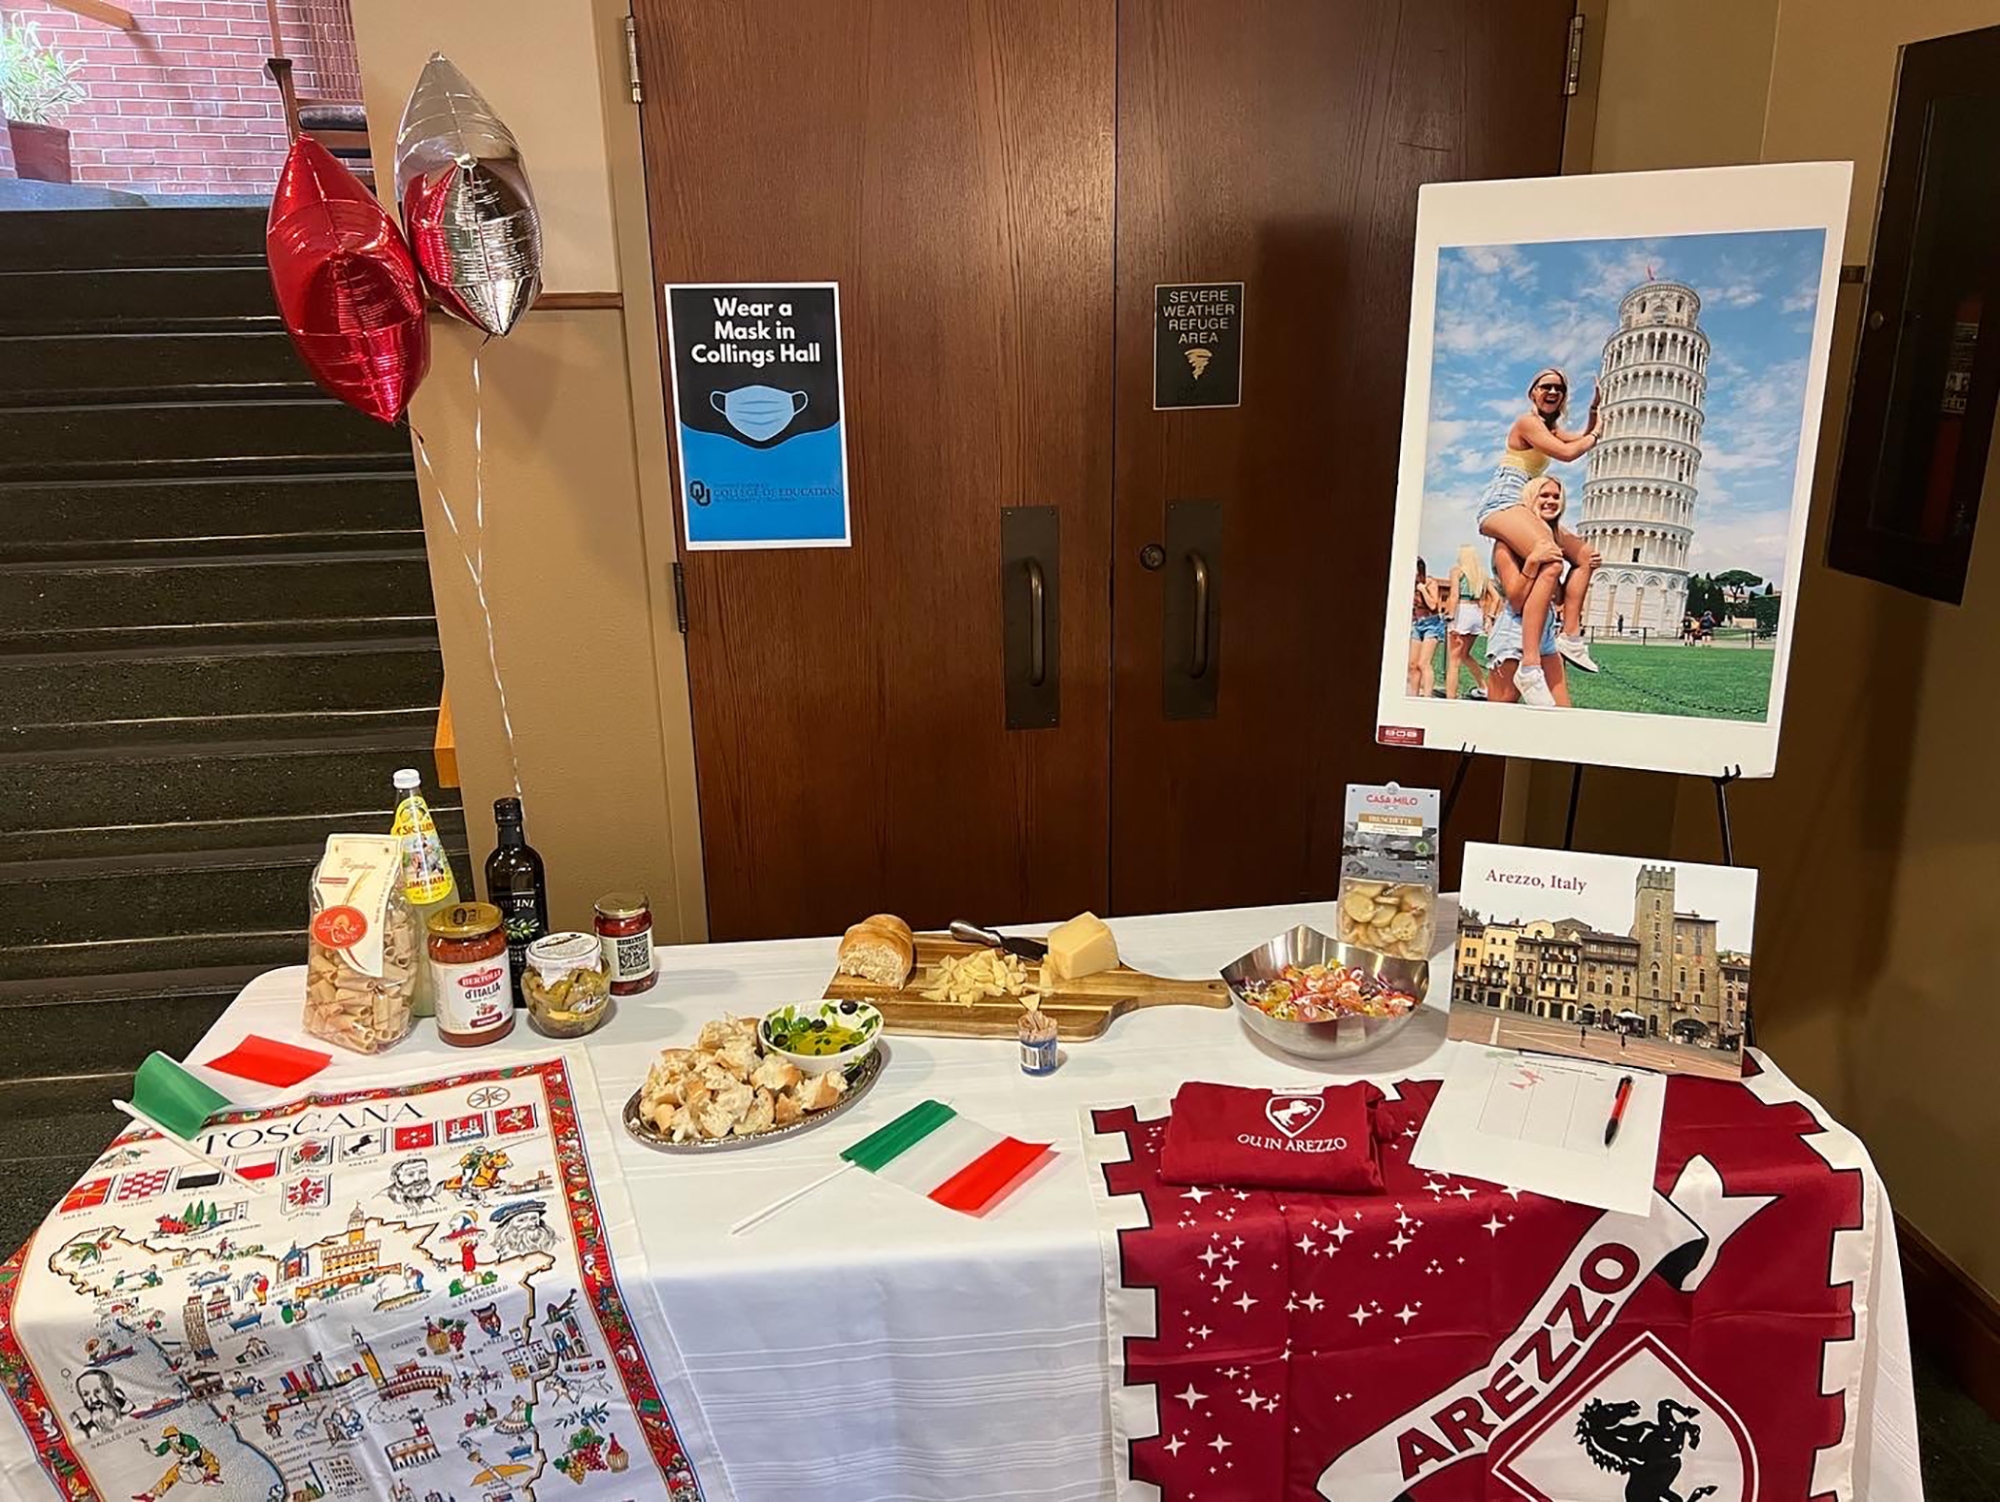 a table with Italian snacks and flags